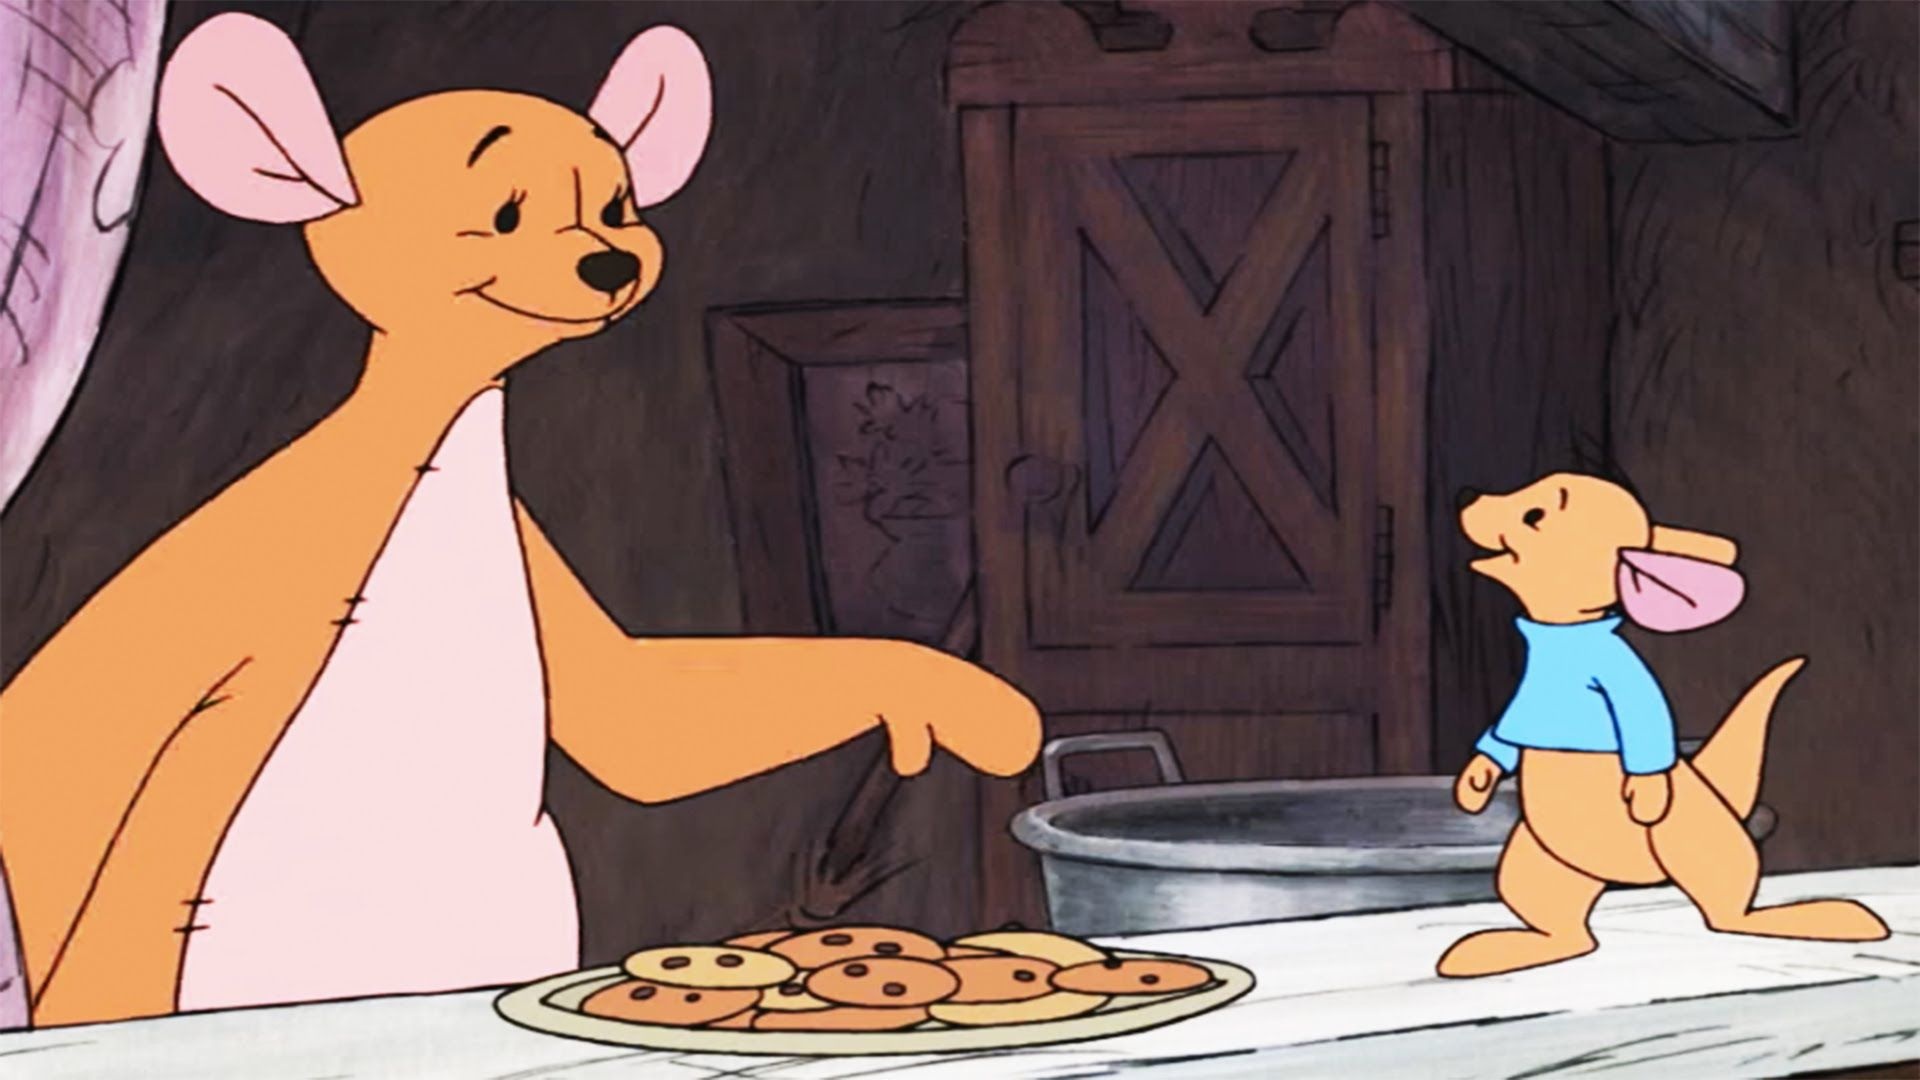 Baby Roo, Winnie-the-Pooh animation, Kanga and Roo, Winnie the Pooh pictures, 1920x1080 Full HD Desktop